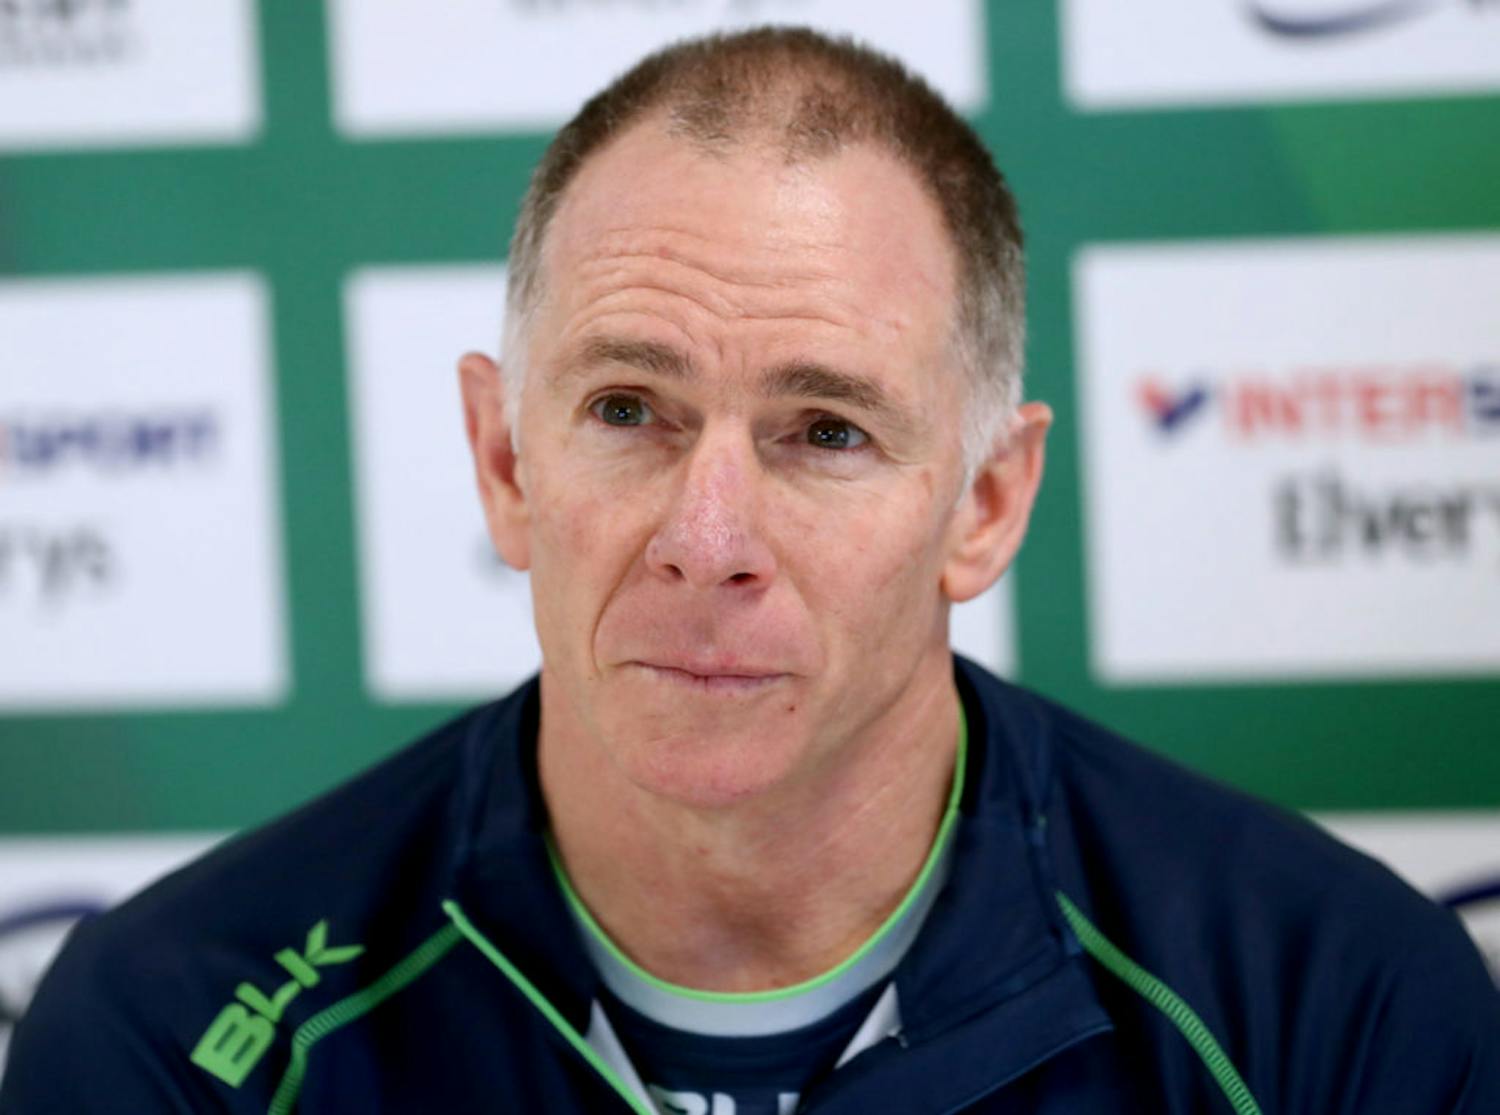 Andy Friend - Connacht's form, Jack Carty's talent and settling into his new role